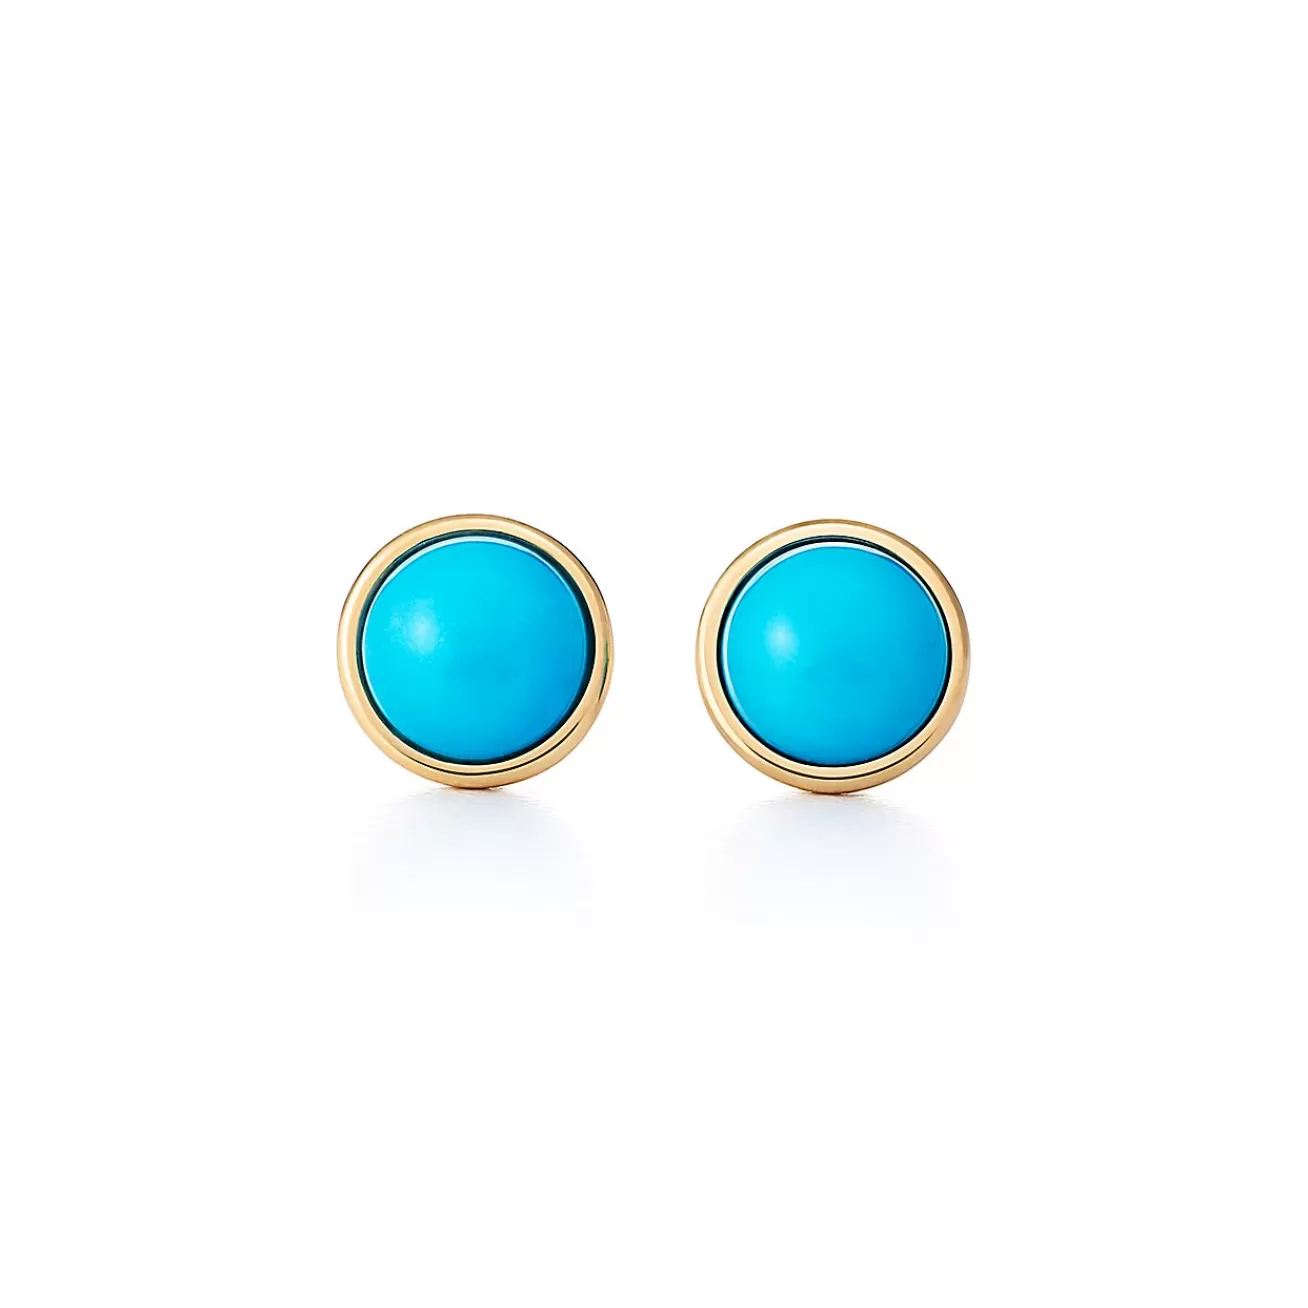 Tiffany & Co. Elsa Peretti® Color by the Yard earrings in 18k gold with turquoise cabochons. | ^ Earrings | Gold Jewelry